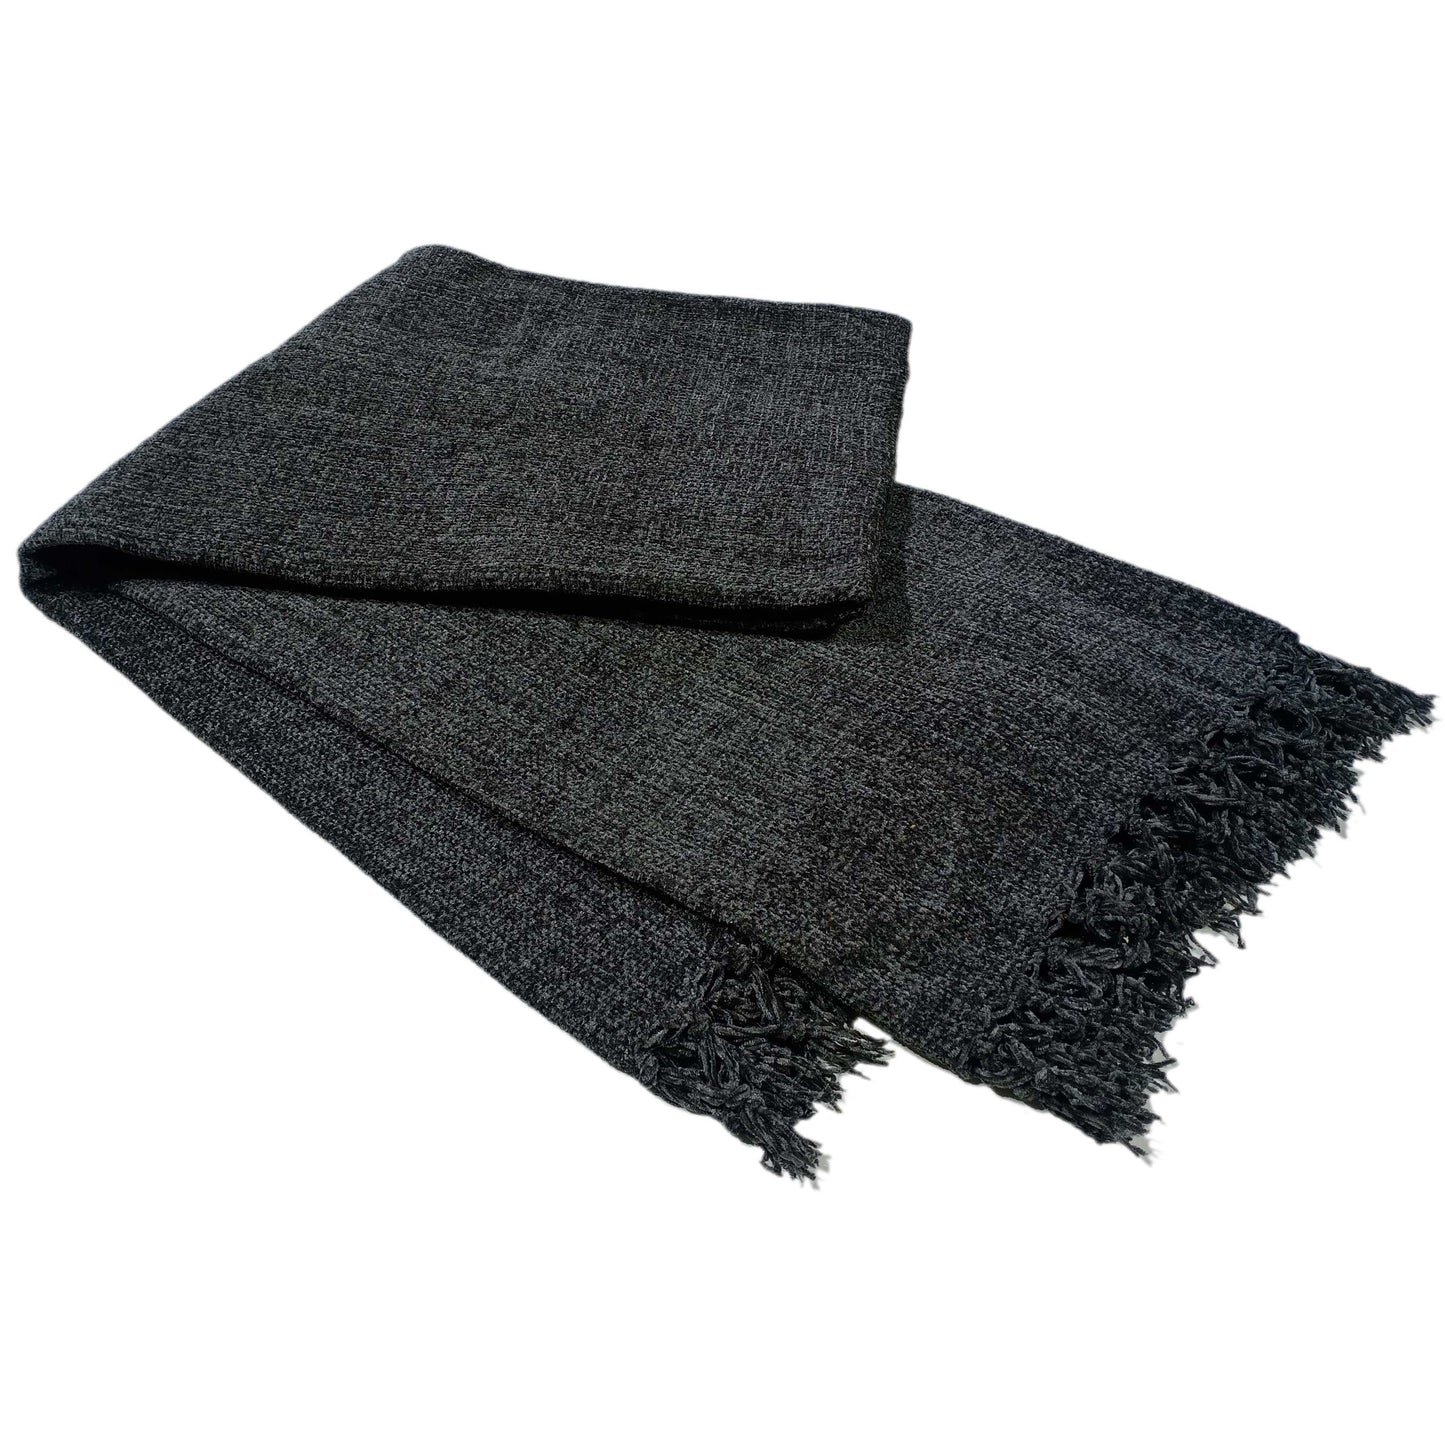 Chenille Throw Blanket with Tassels for Couch Sofa Chair Bed Home Decoration CHARCOAL / 130 x 170 cm OLIVIA ROCCO Throw